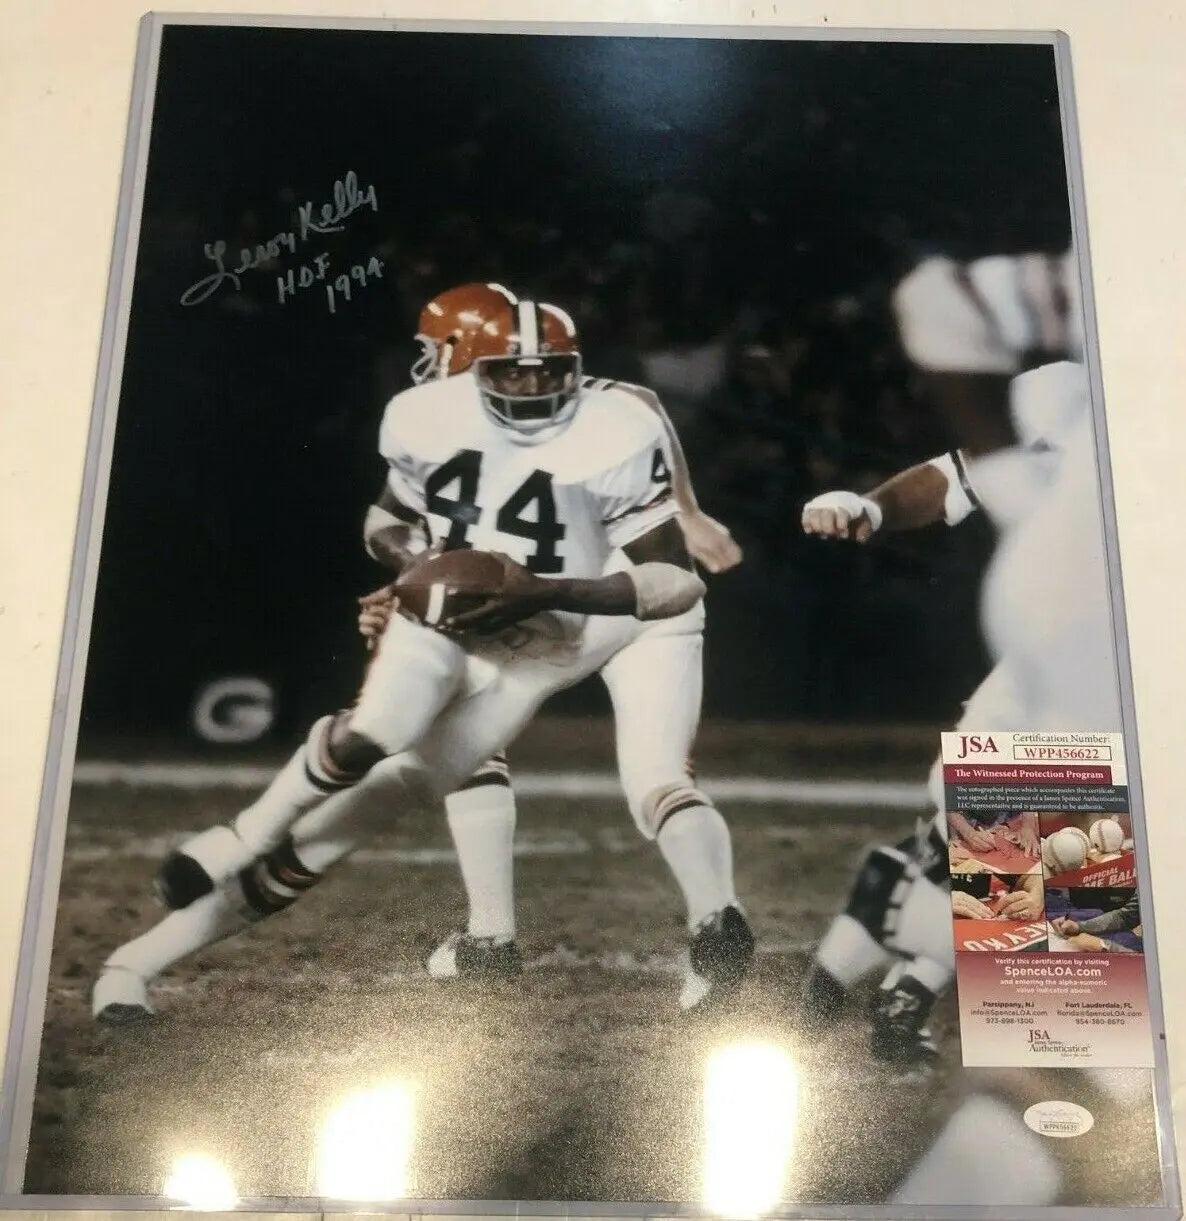 MVP Authentics Leroy Kelly Autographed Signed Inscribed Cleveland Browns 16X20 Photo Jsa Coa 72 sports jersey framing , jersey framing